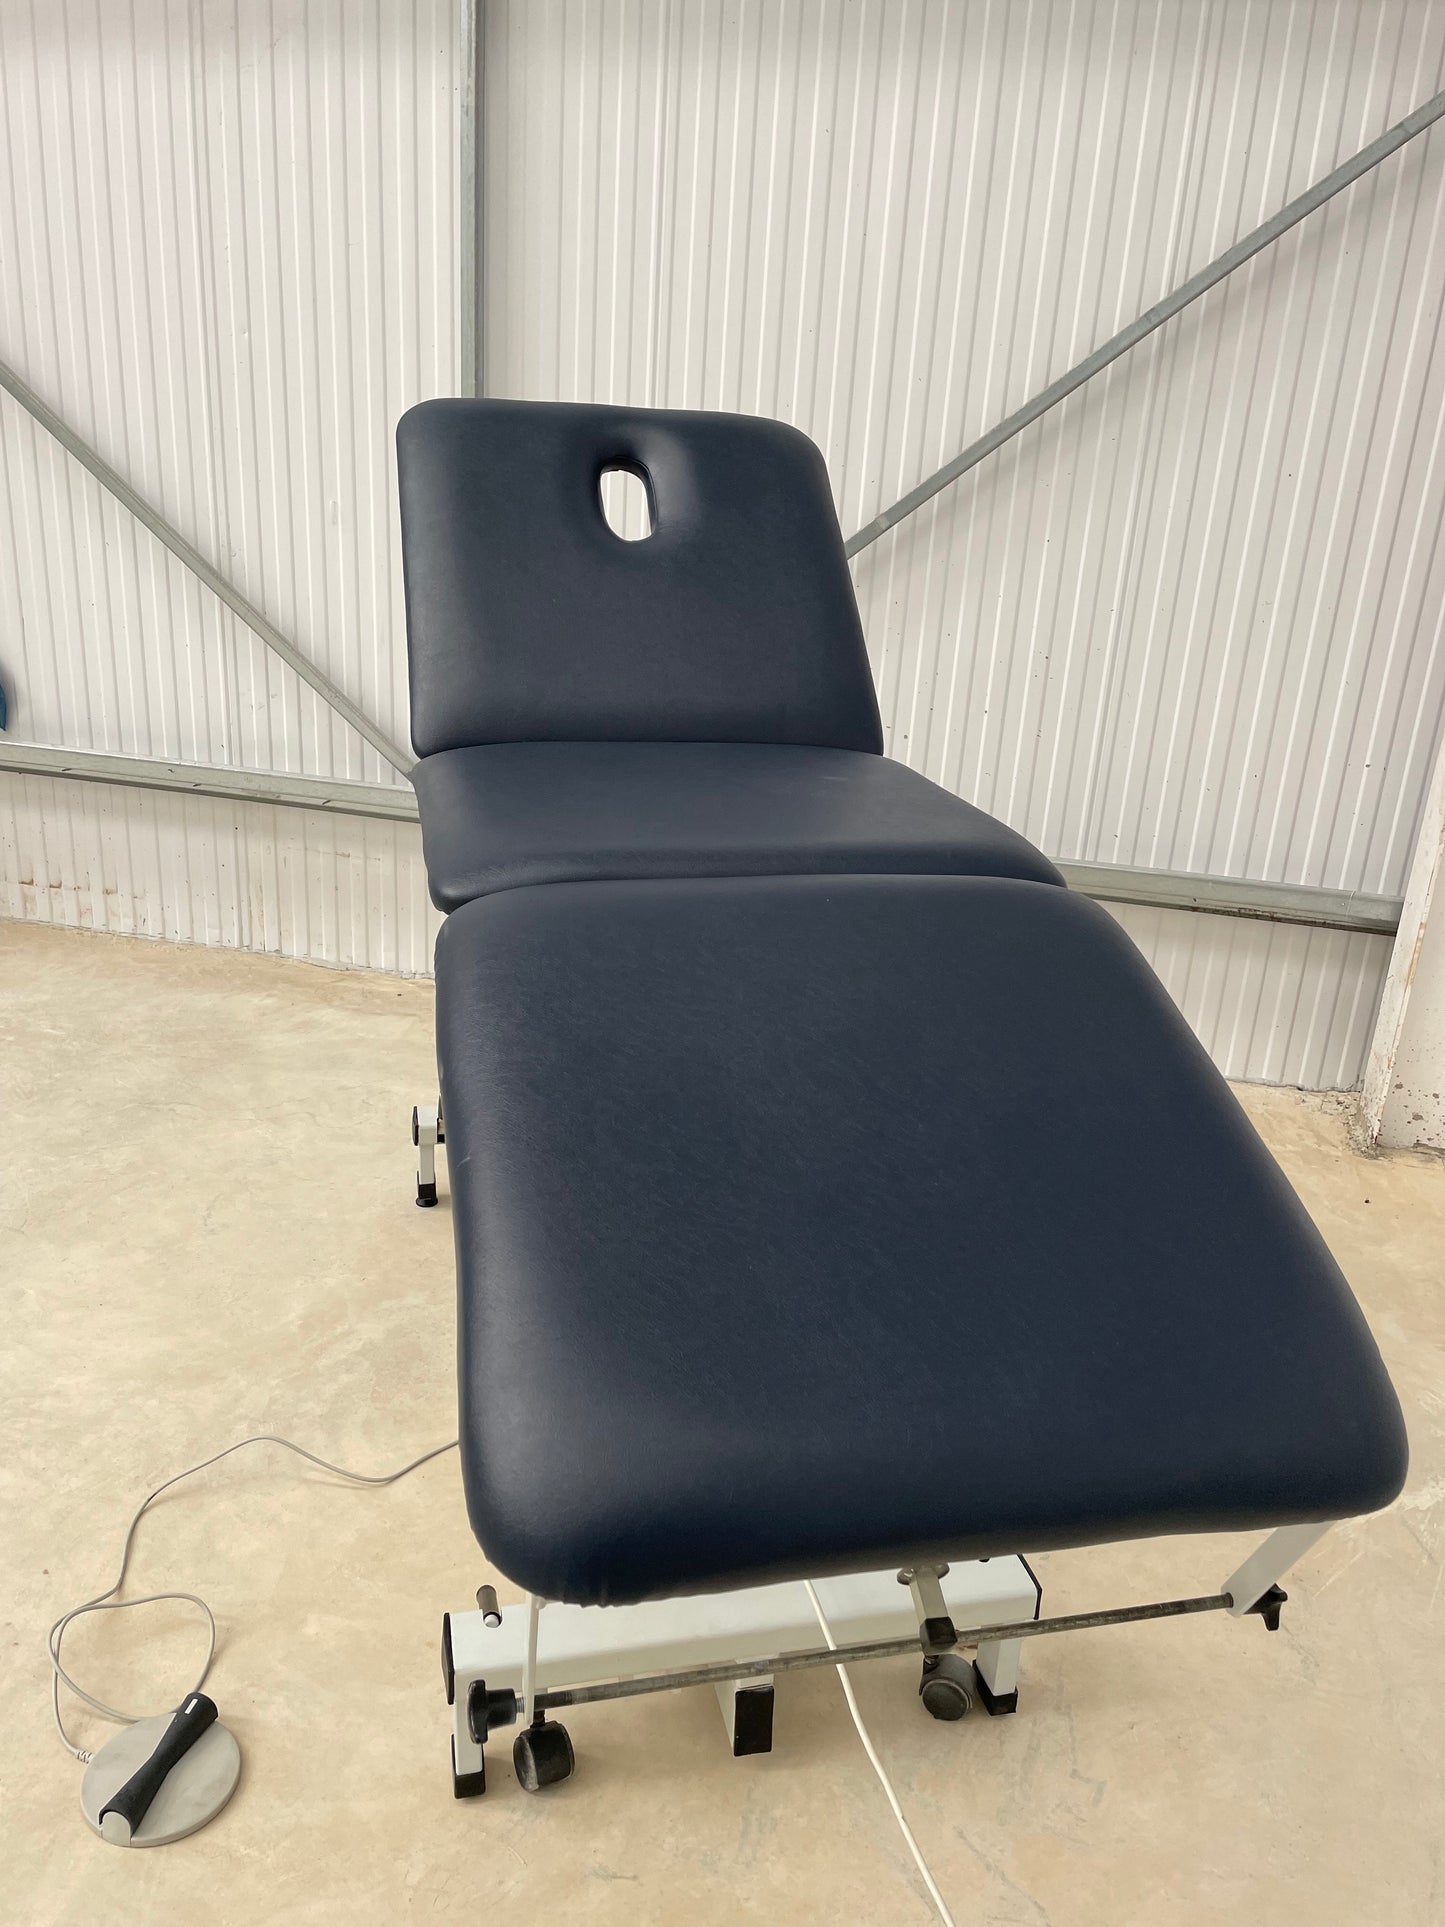 Reconditioned Three Section Electric Medical / Physio / Treatment Couch with facehole